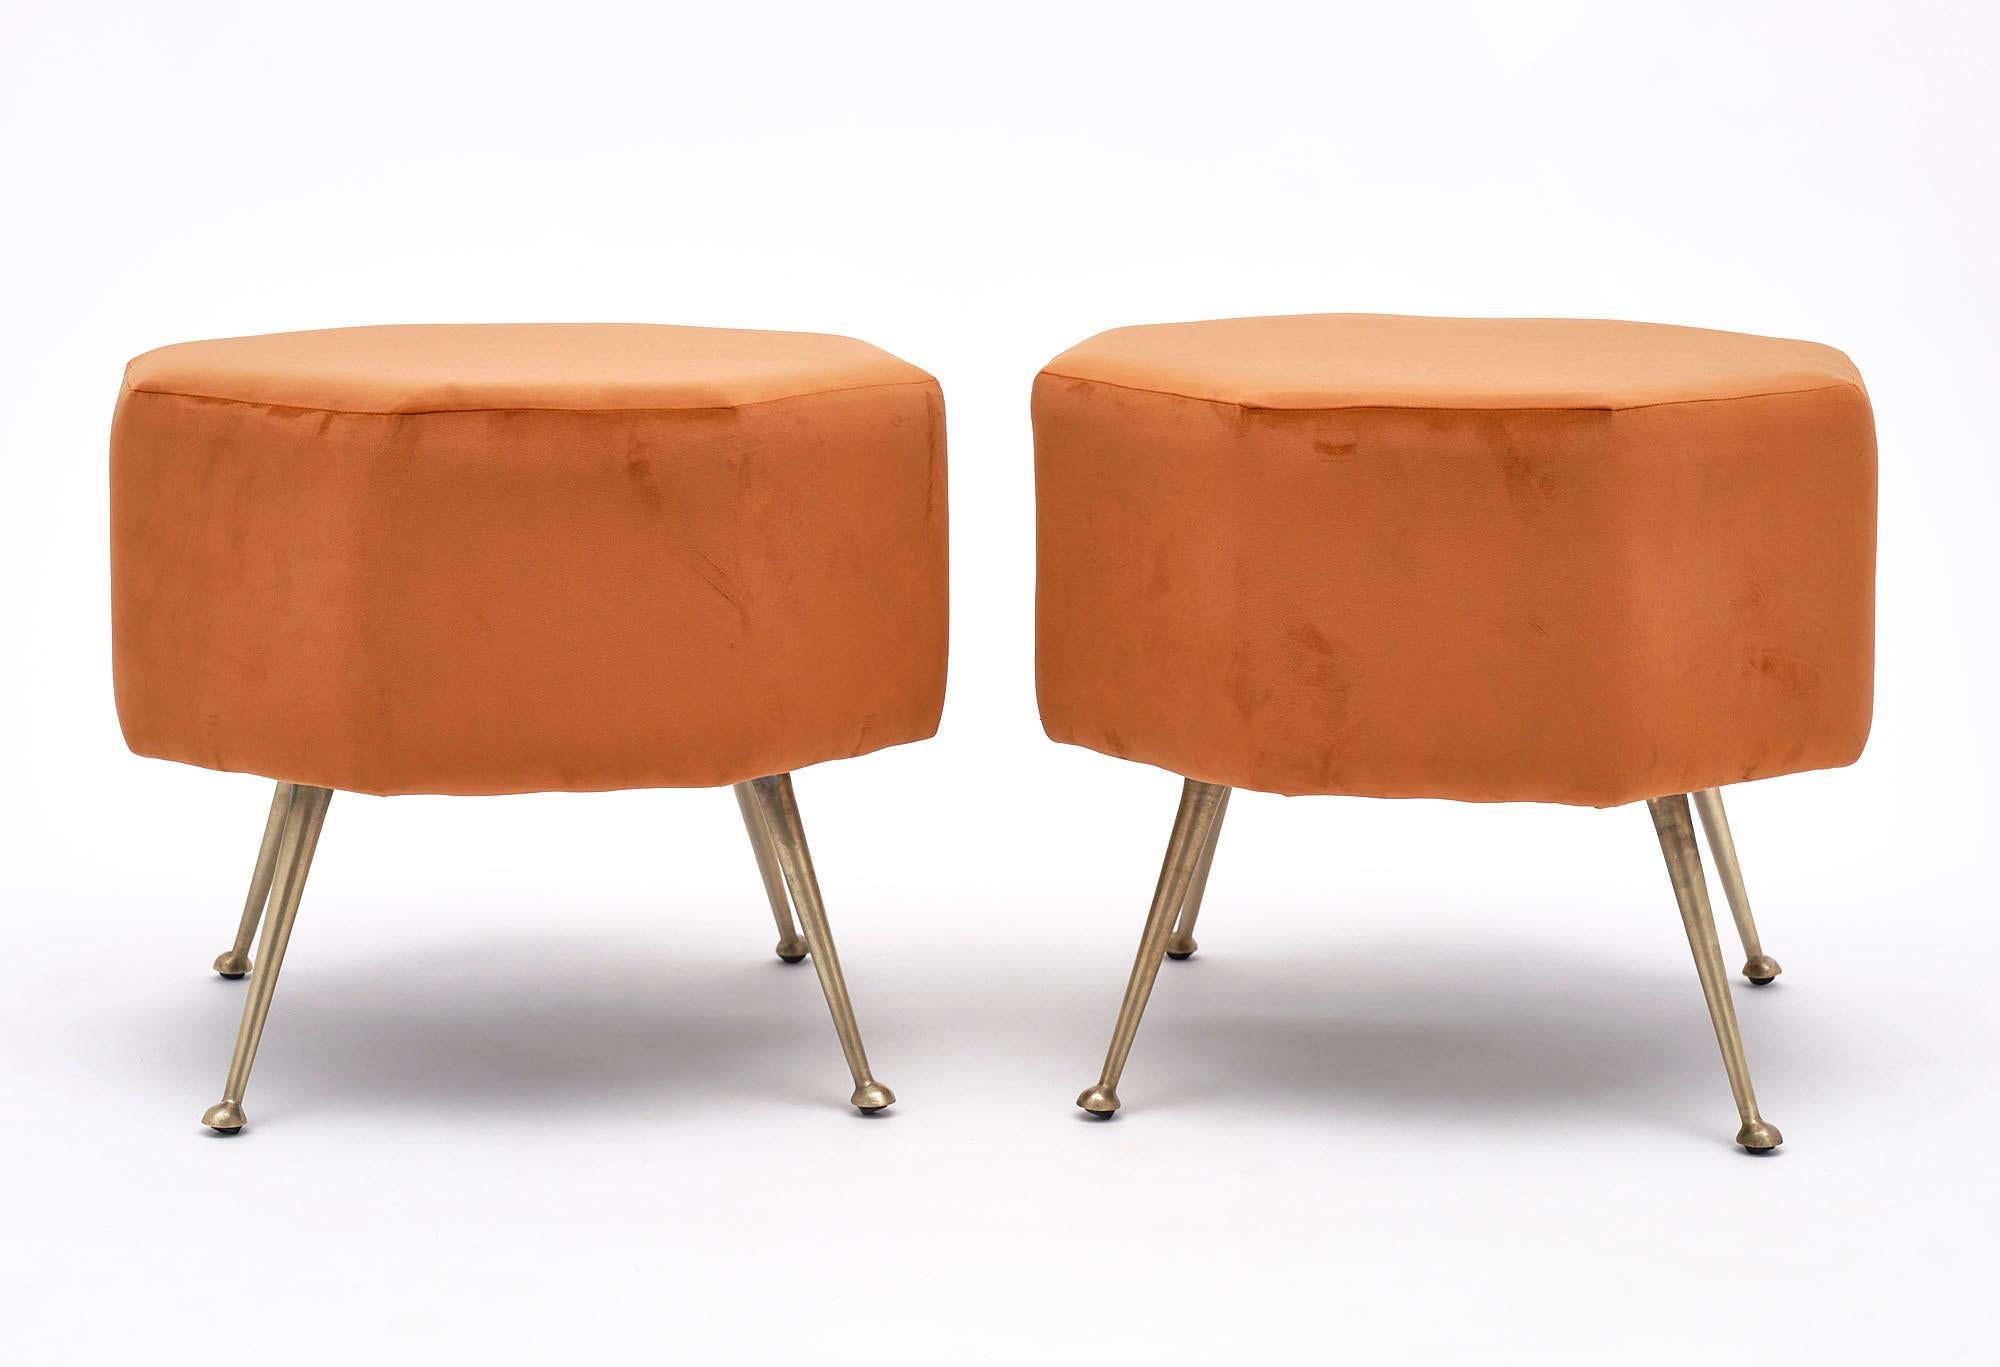 Pair of stools from Italy with flaring gilt brass legs and newly upholstered in a bright orange micro fiber.